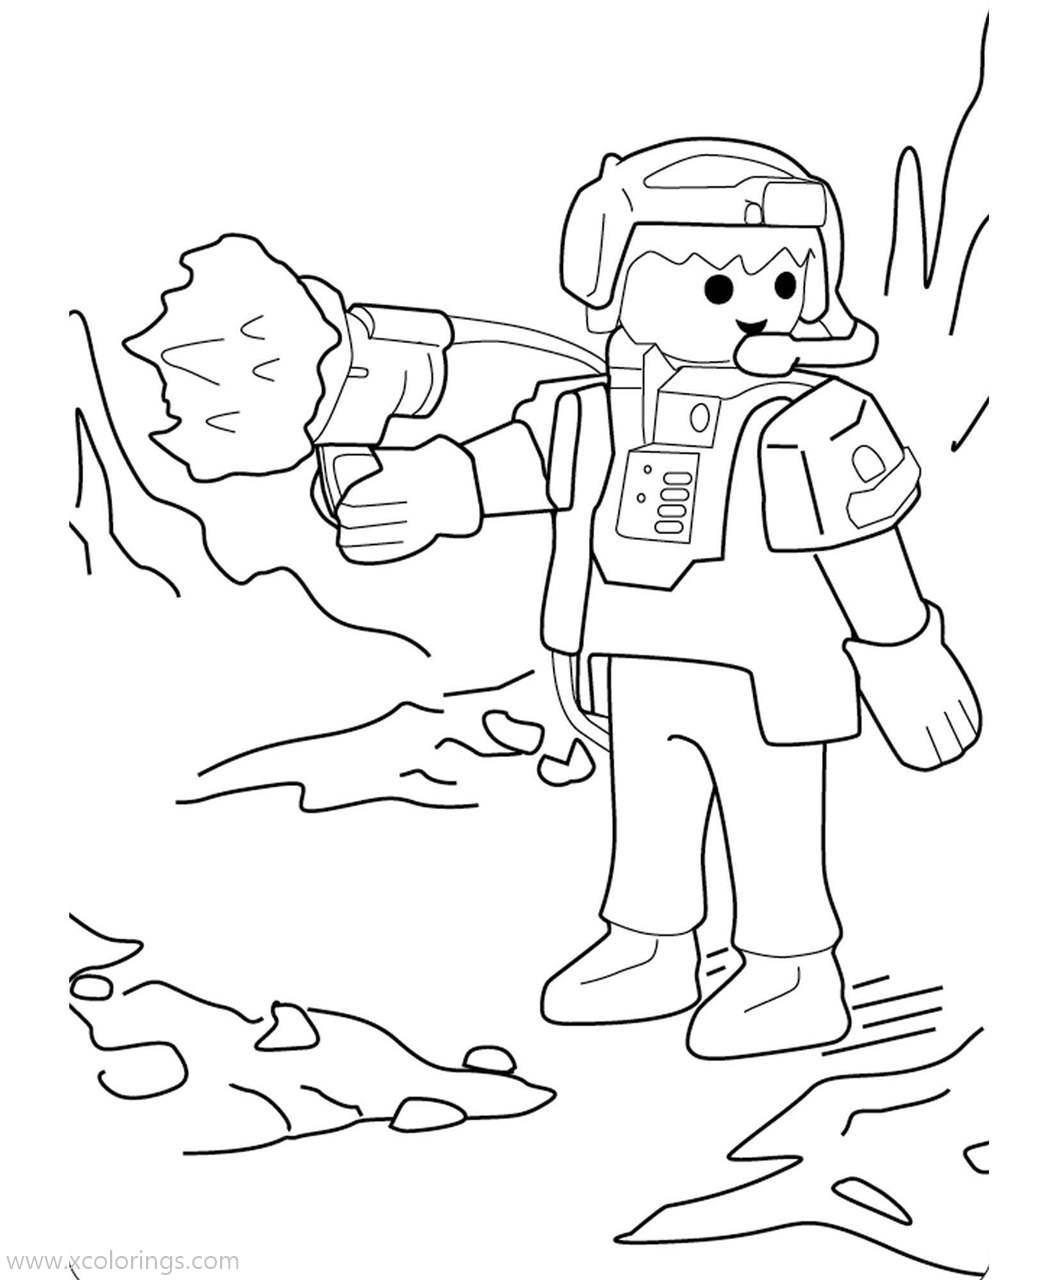 Free Playmobil Coloring Pages Boy with Helmet printable